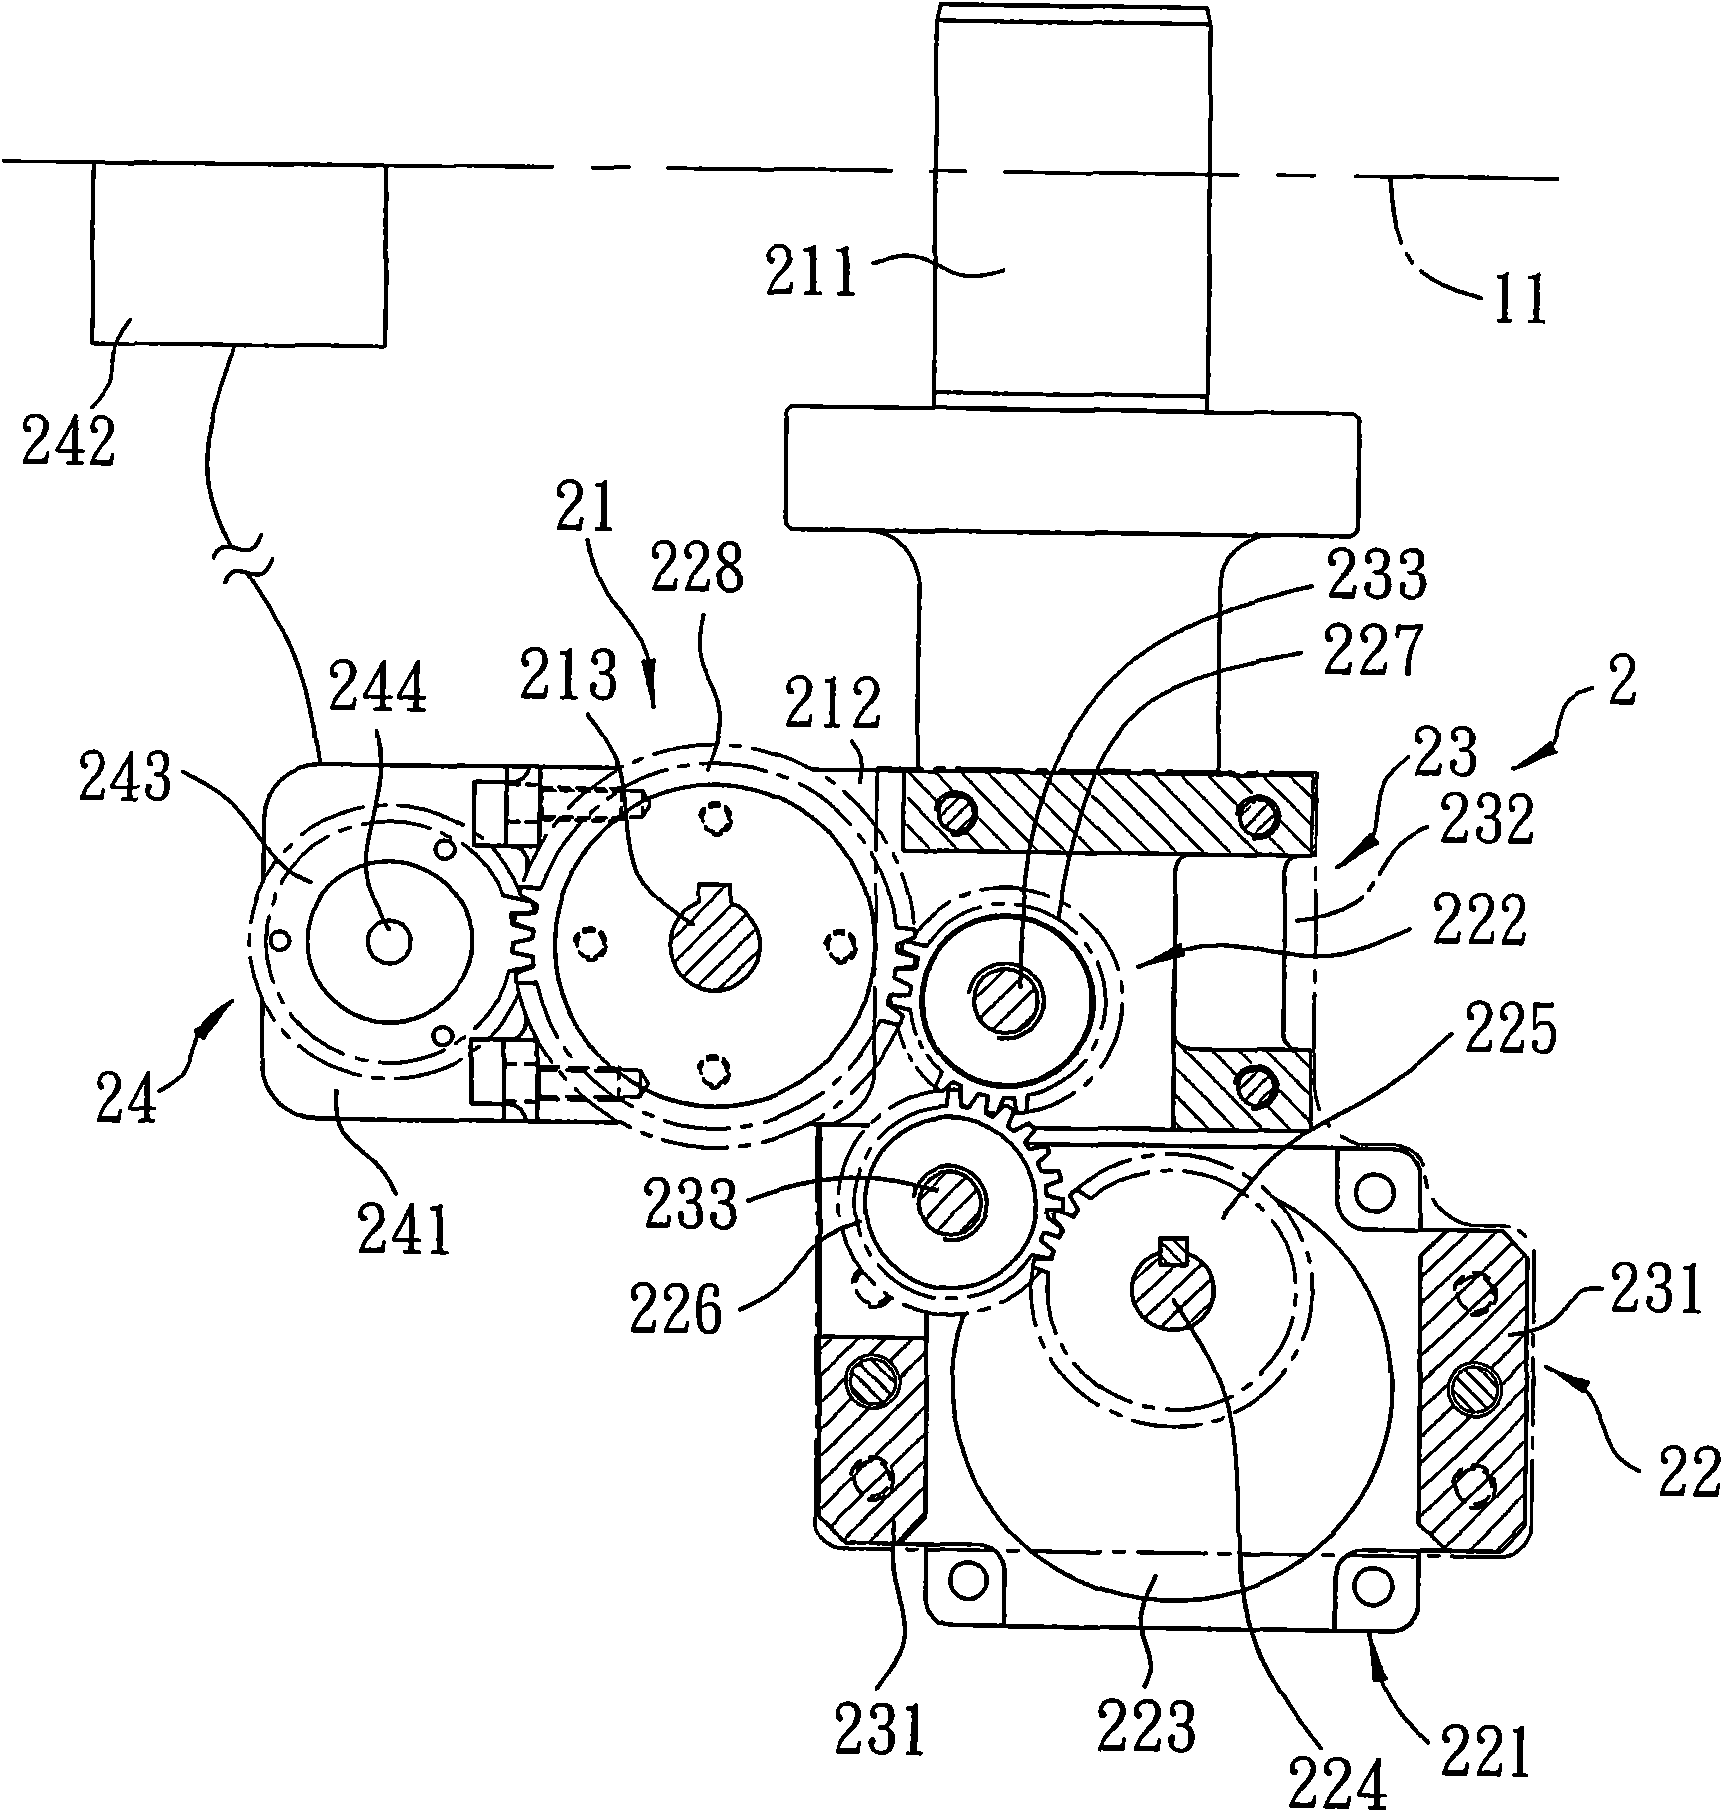 Regulator of feeding device of forged part forming machine